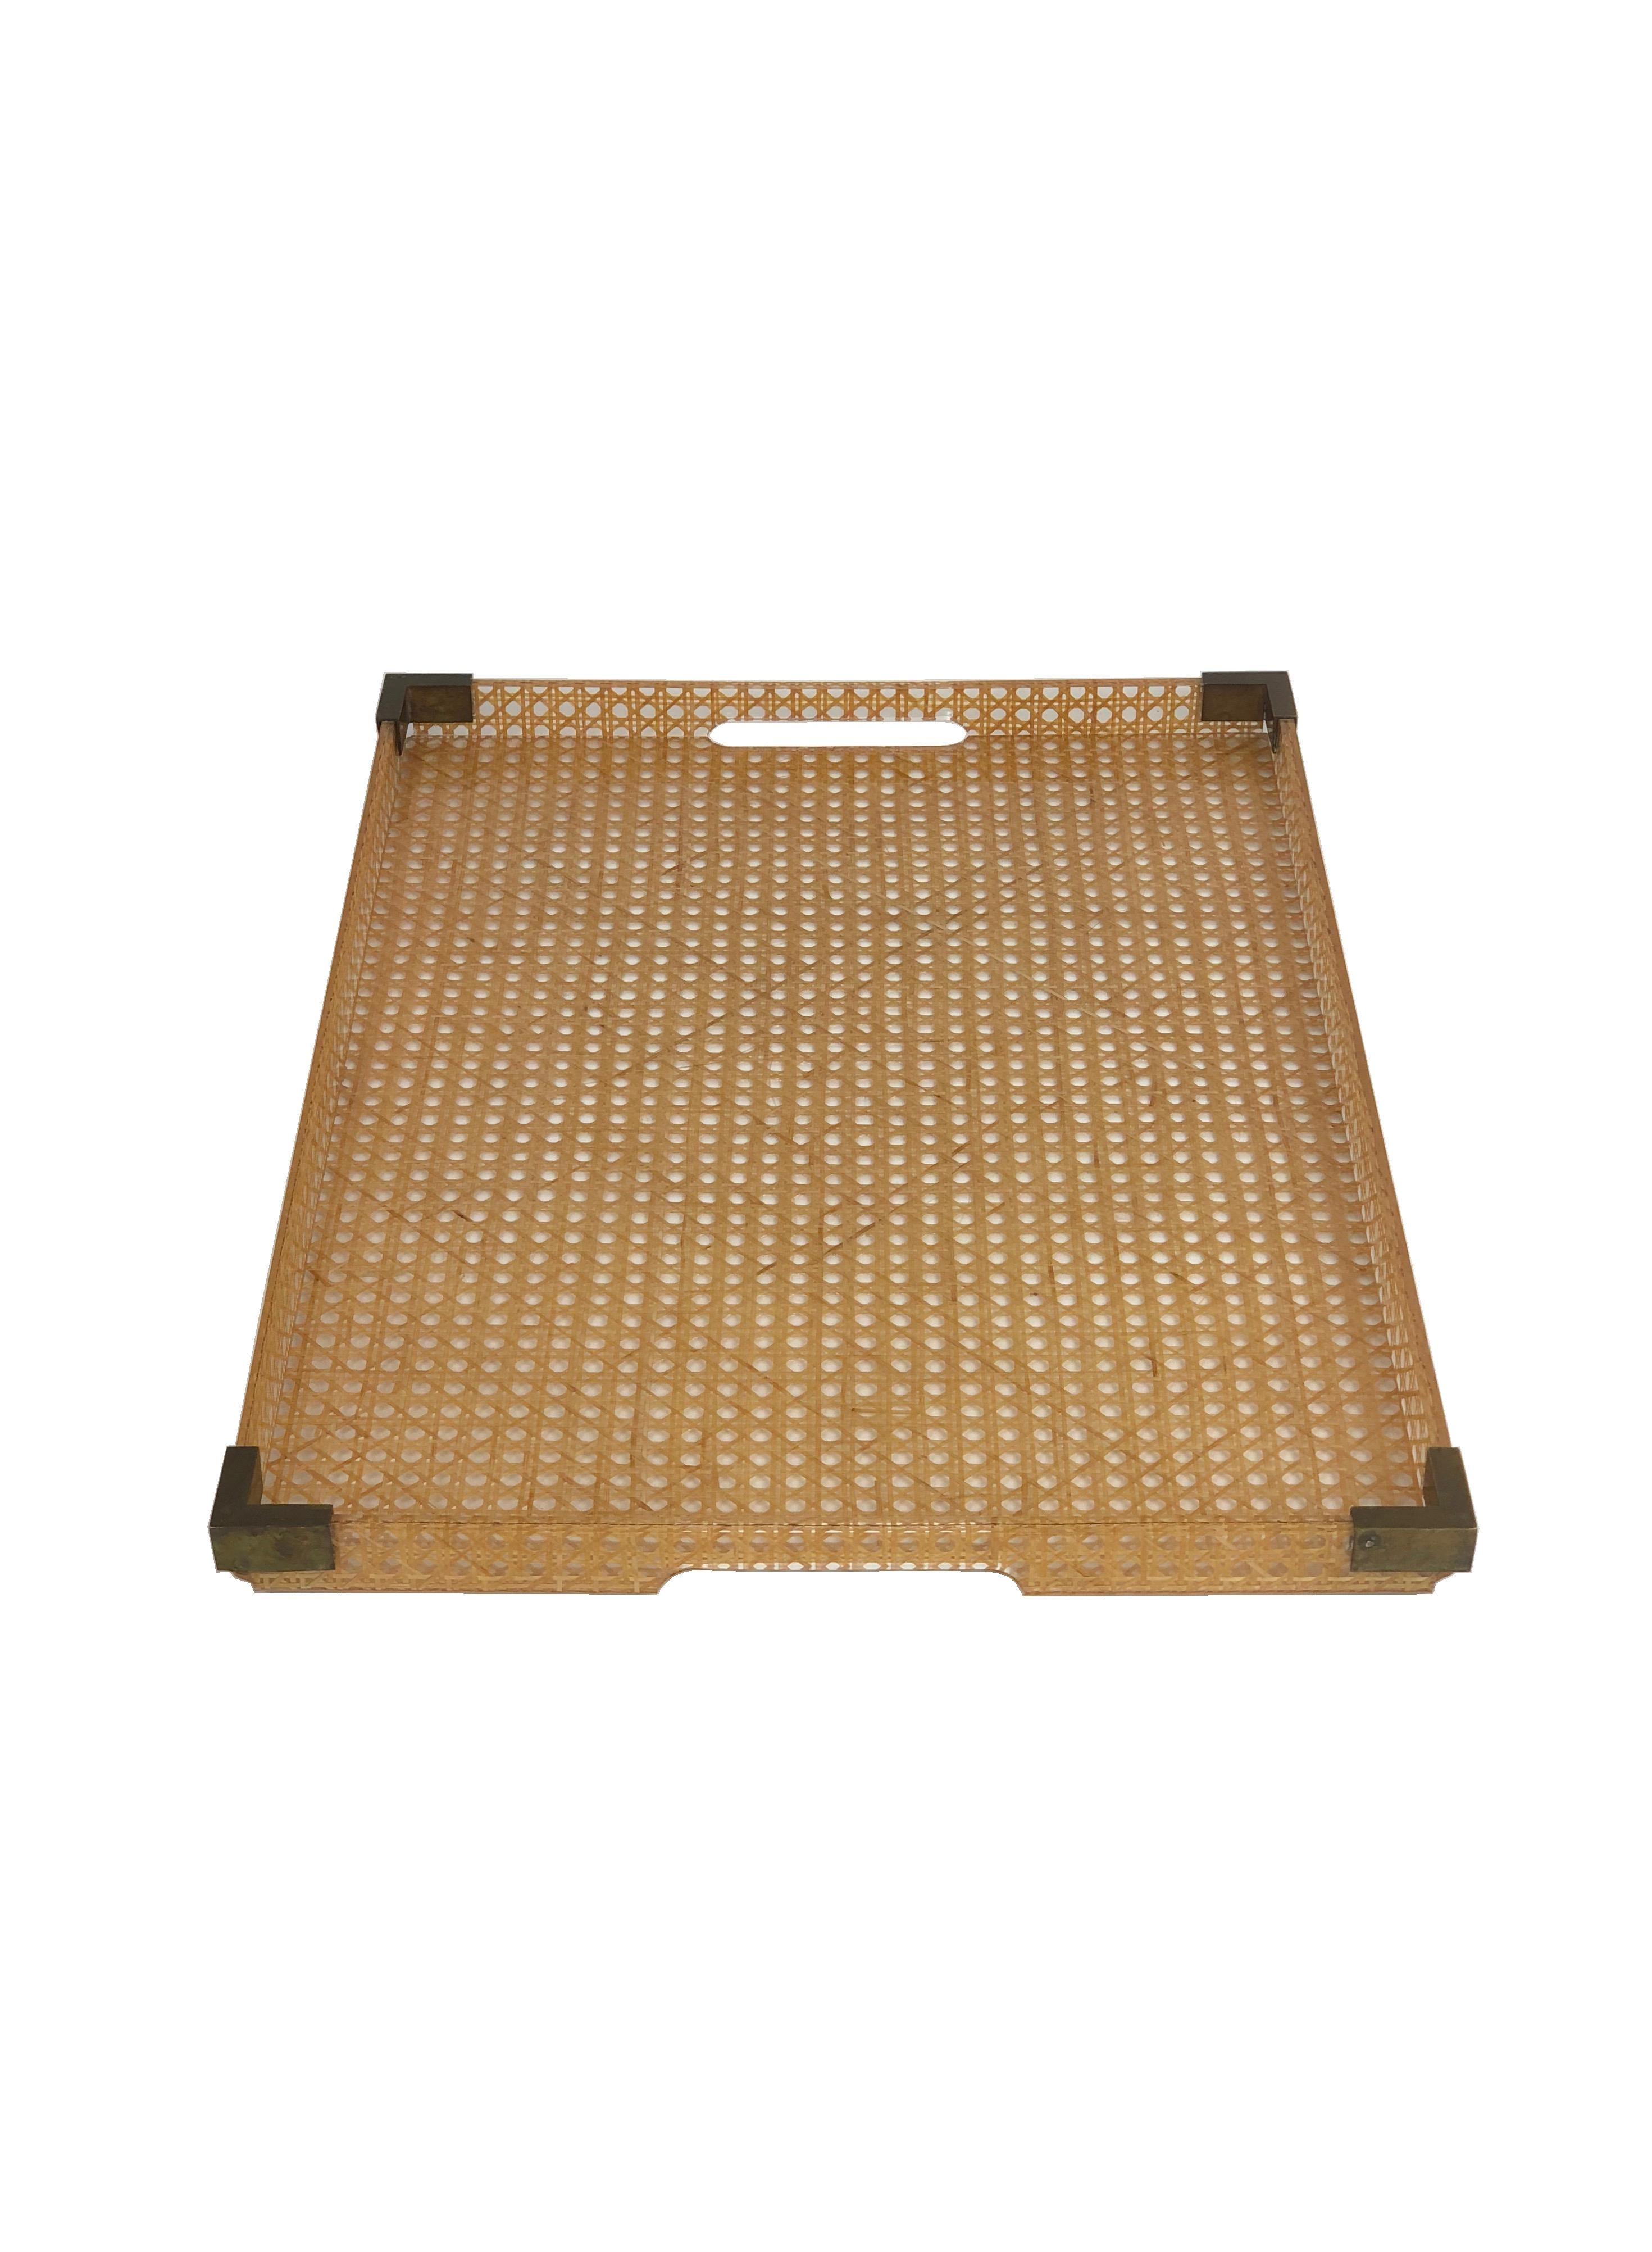 French 1970s Lucite, Brass and Rattan Serving Tray by Christian Dior Home Collection